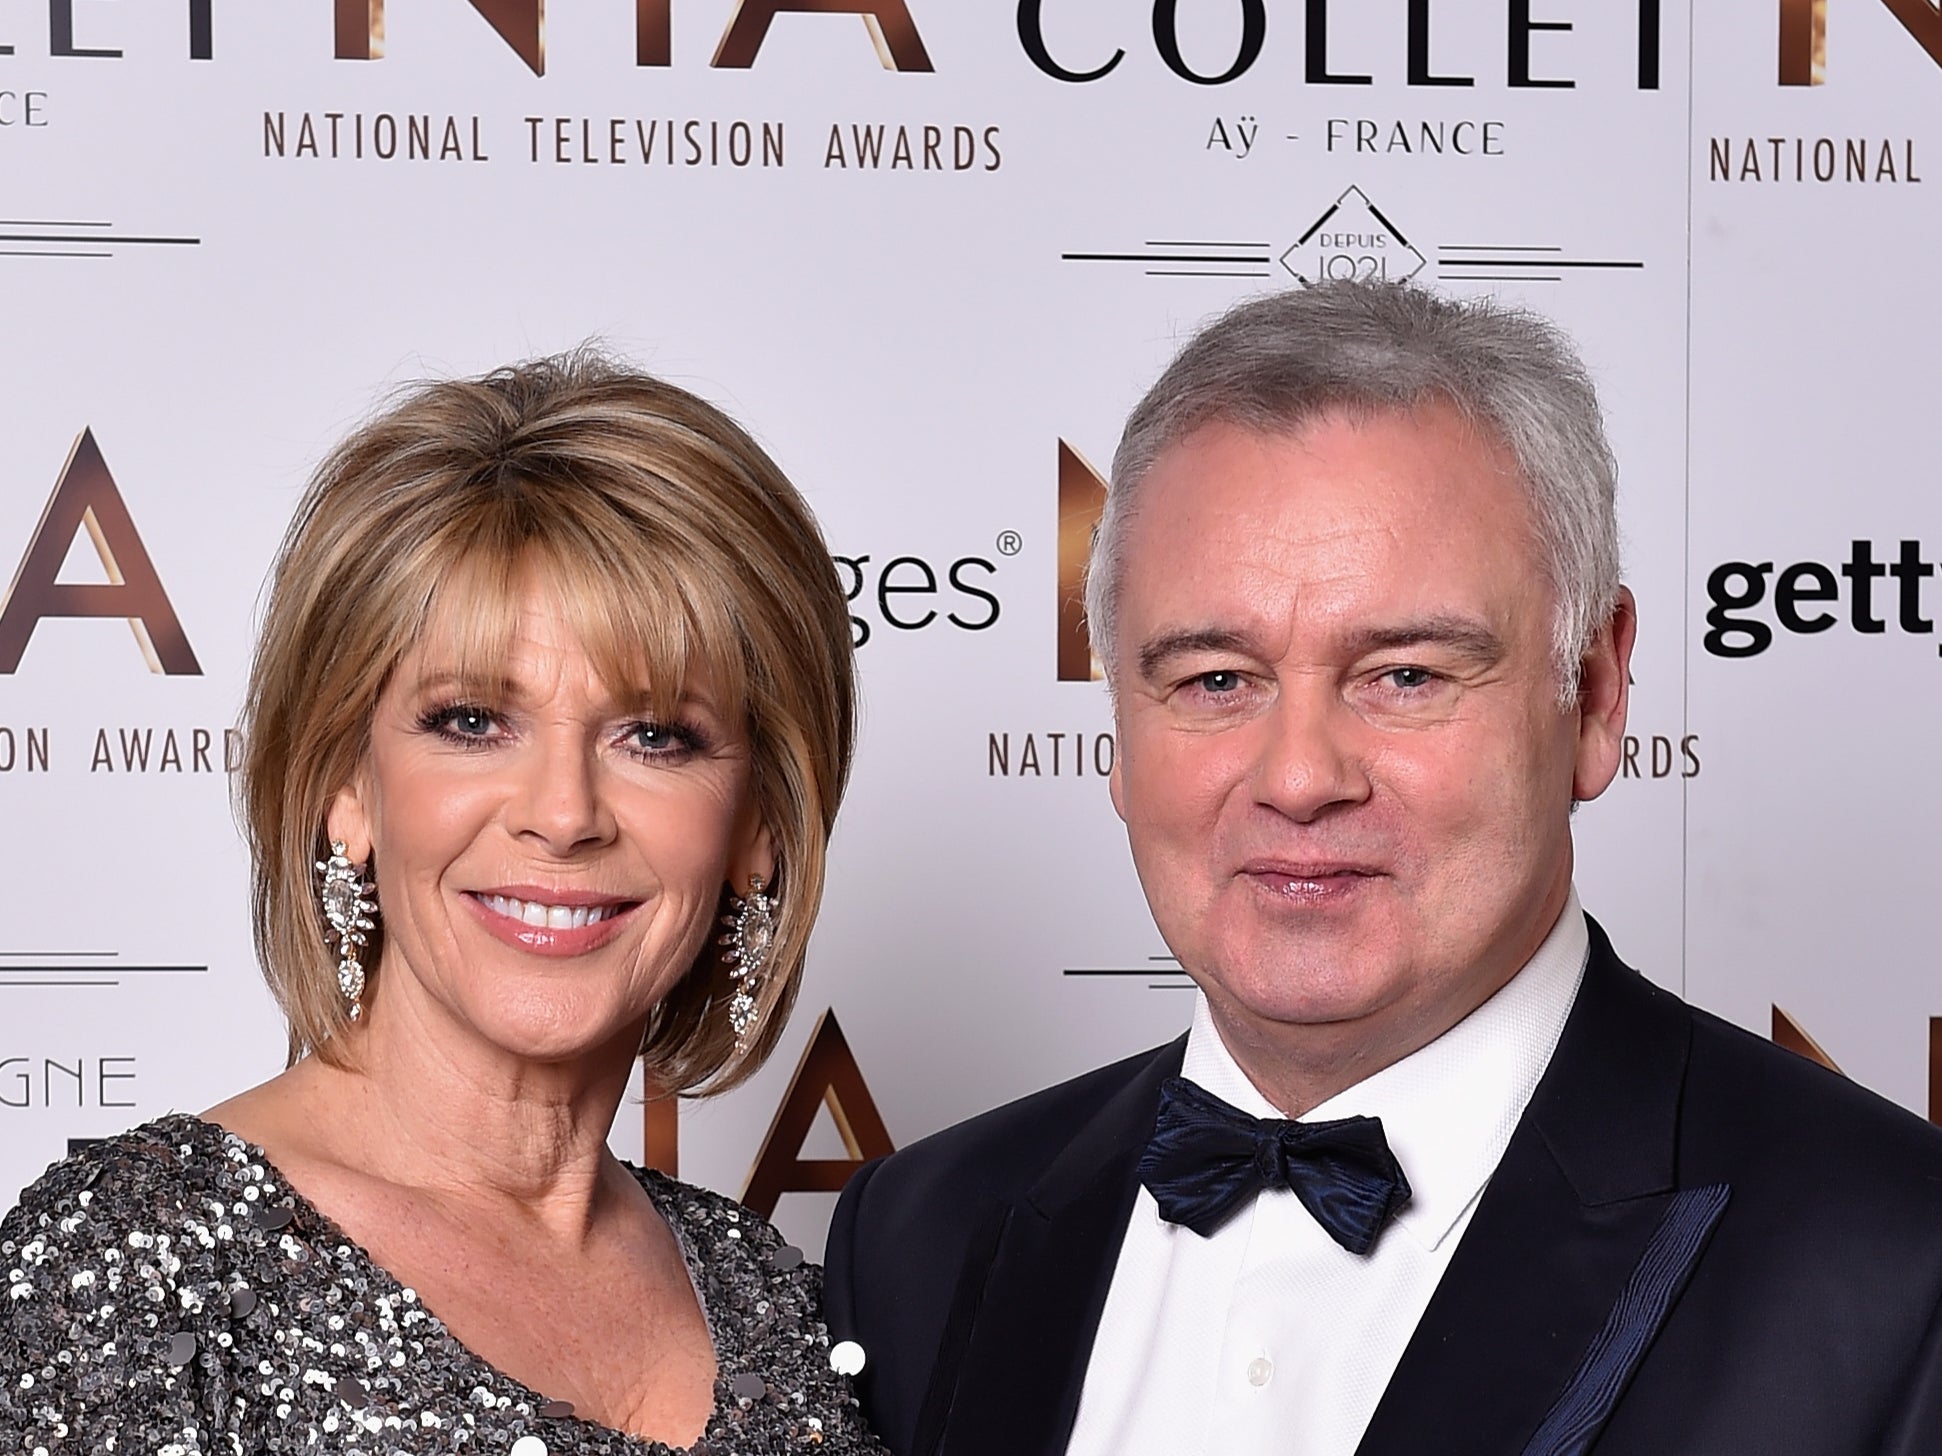 Ruth Langsford and Eamonn Holmes hope to remain friends